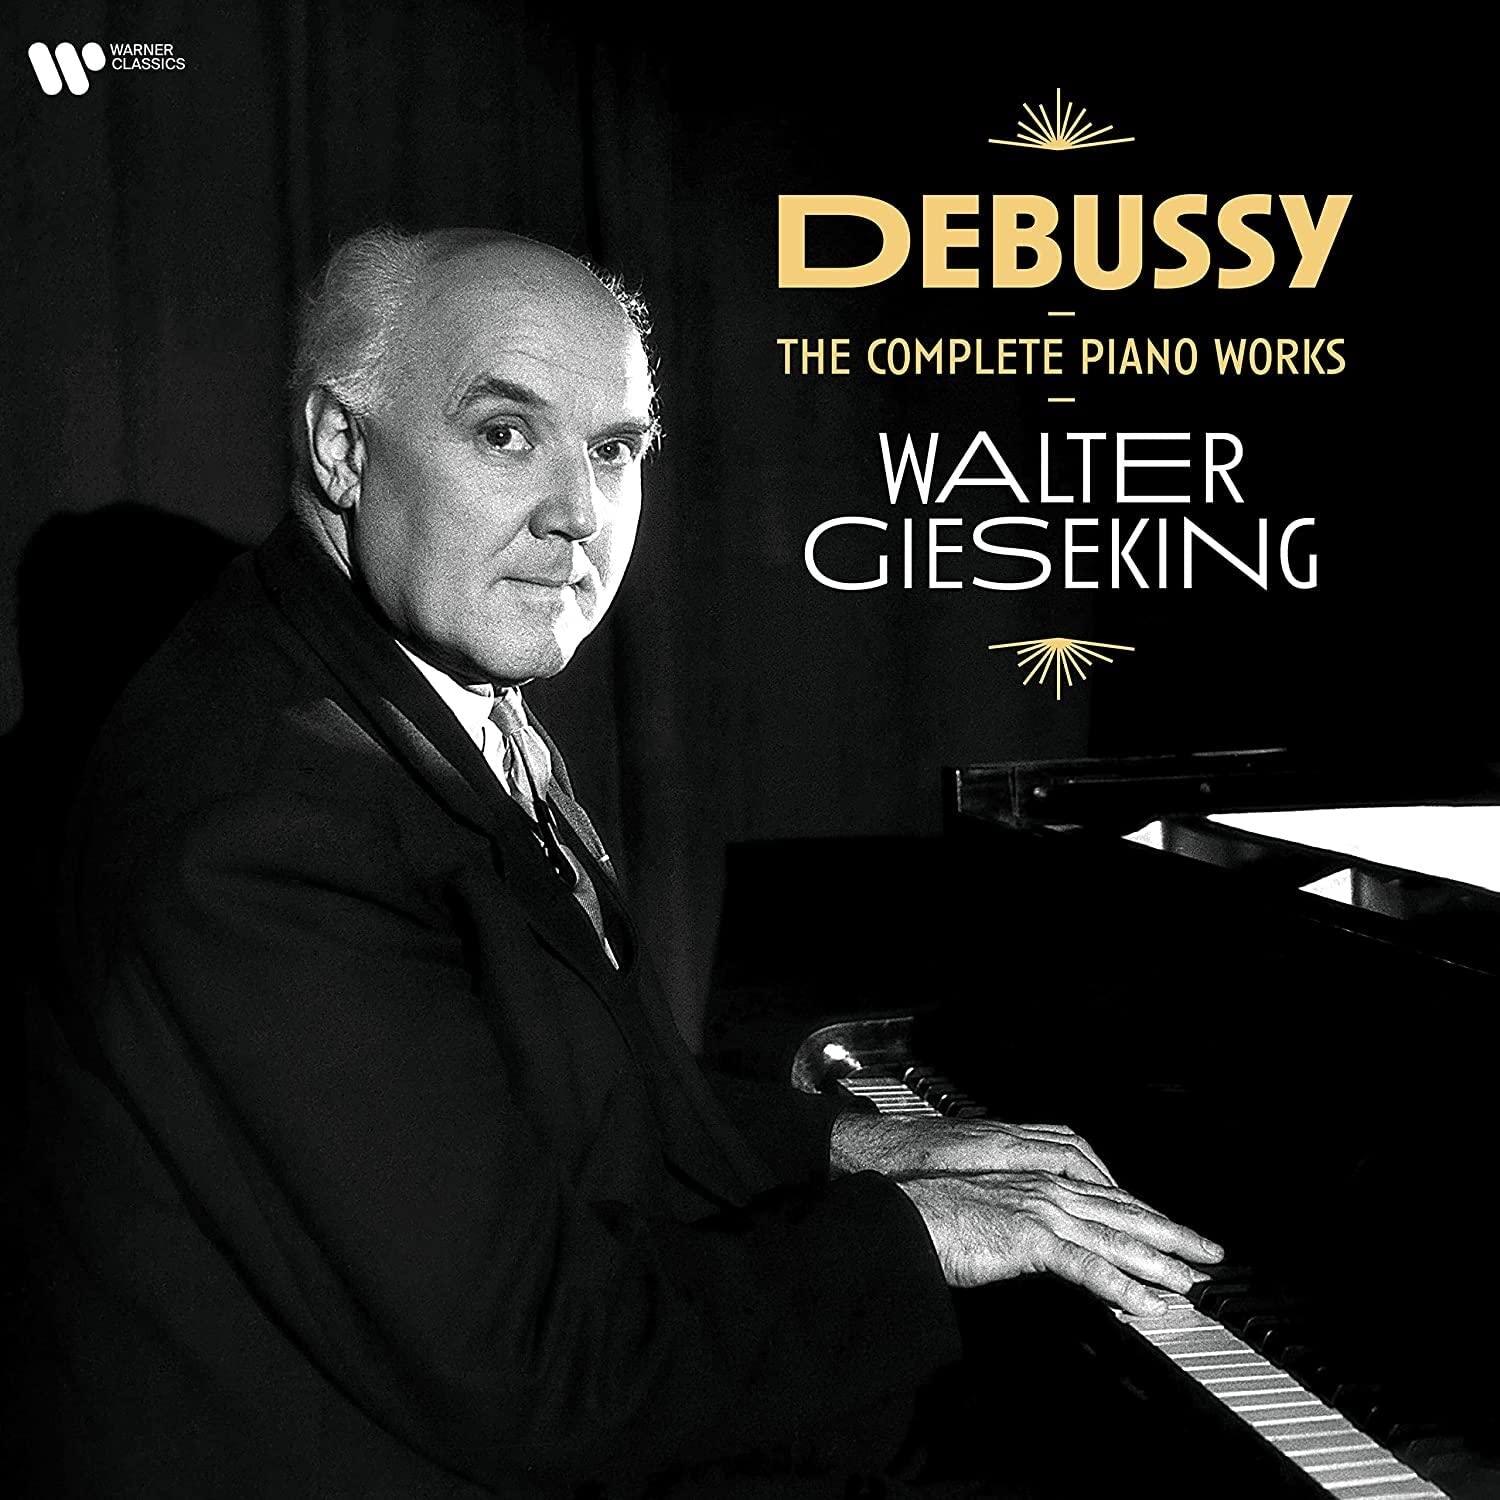 Виниловая Пластинка Walter Gieseking, Debussy: The Complete Piano Works (0190296280436) capouet marianne denisot hugues sesame 1 livre de l eleve